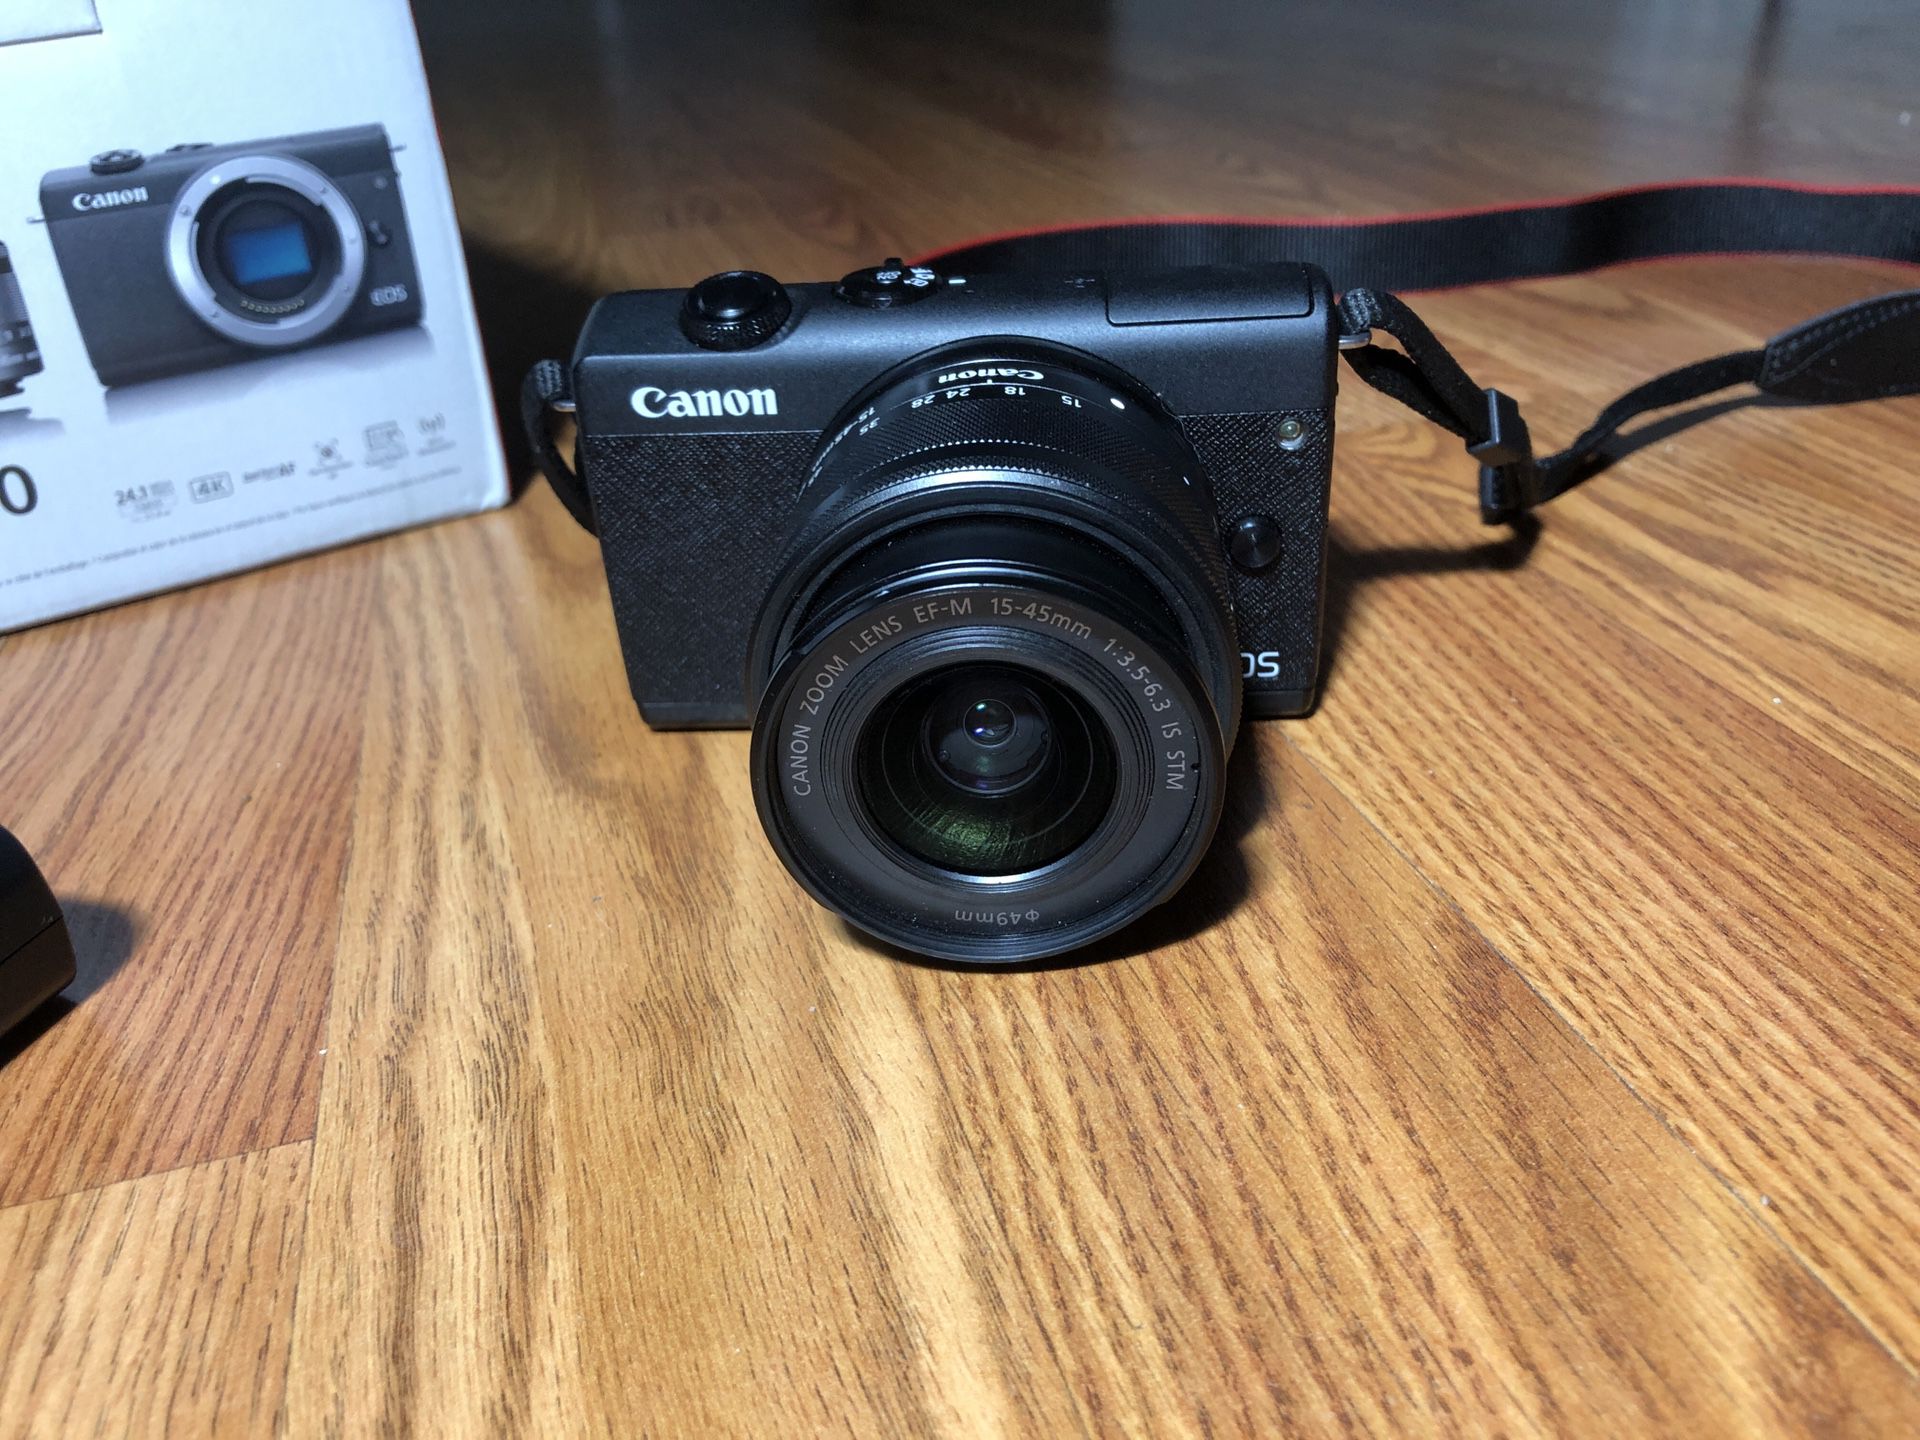 EOS M200 Mirrorless Camera with Lens